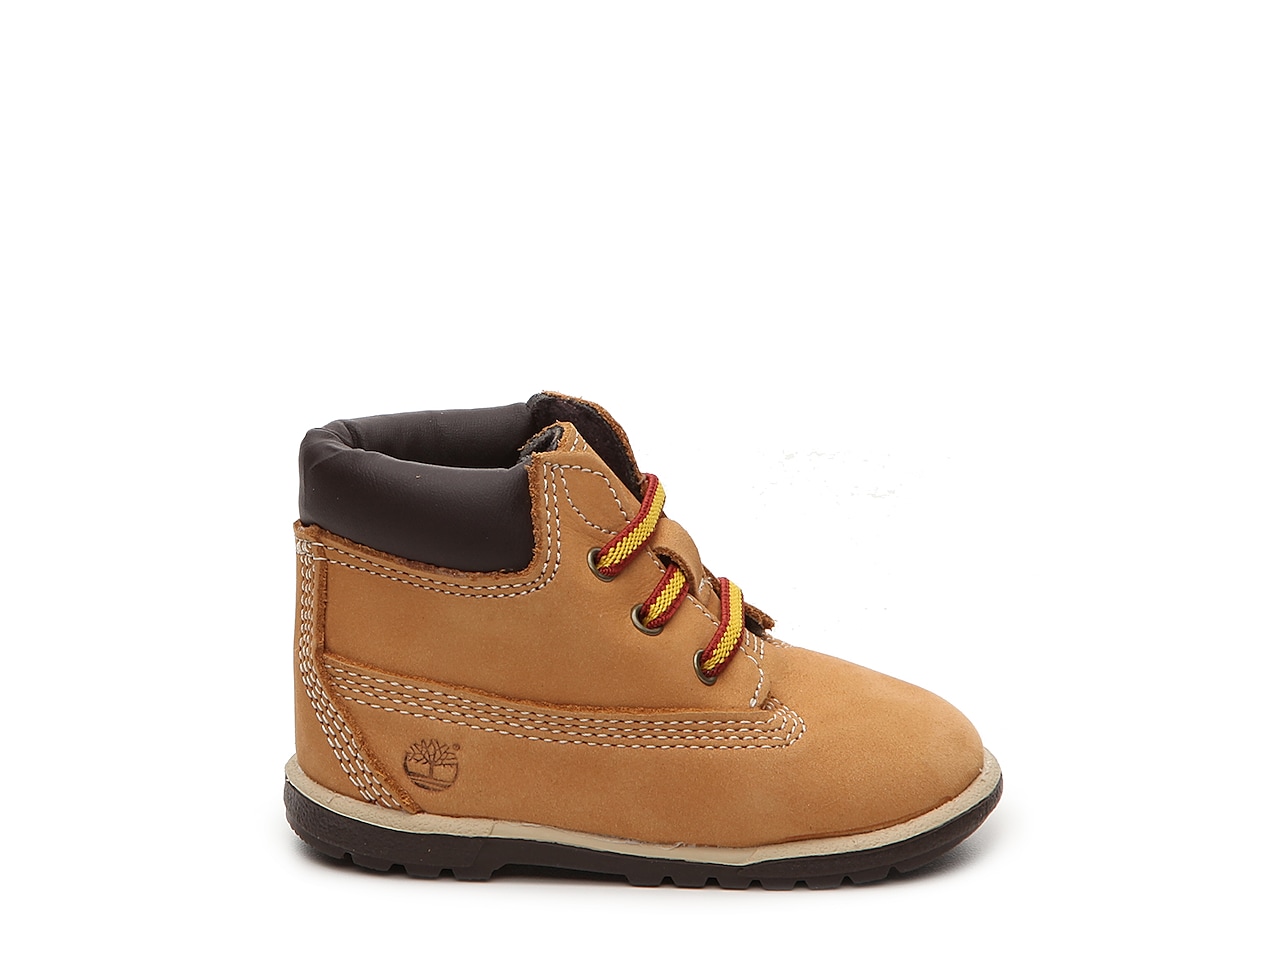 Timberland Cribbie 6 Inch Boot - Kids' Kids Shoes | DSW